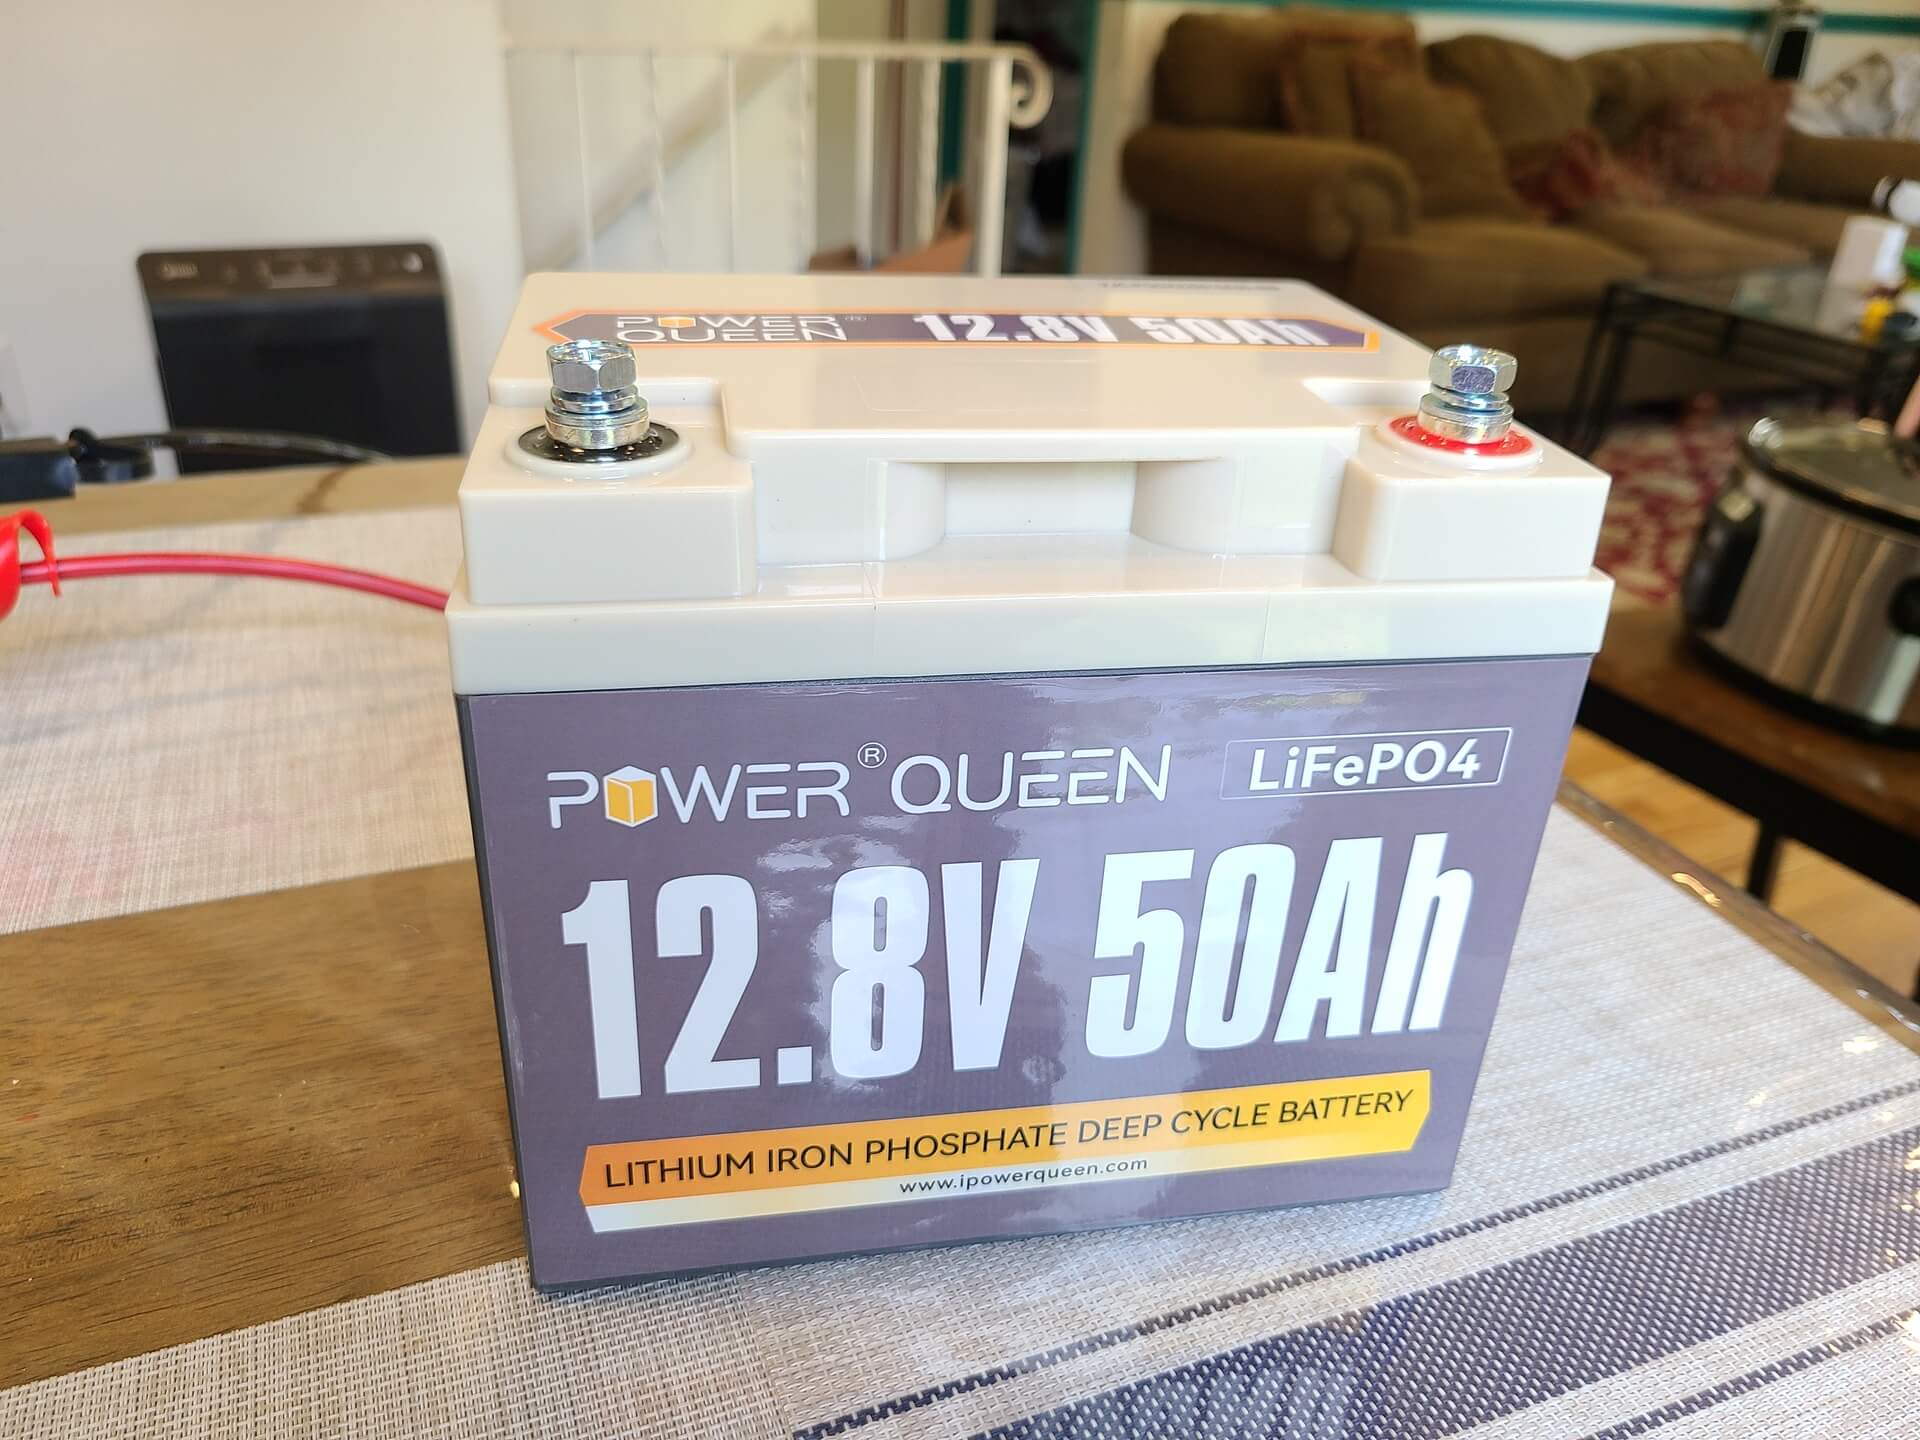 Timeusb 12V 50Ah LiFePO4 Battery, 640Wh & 640W